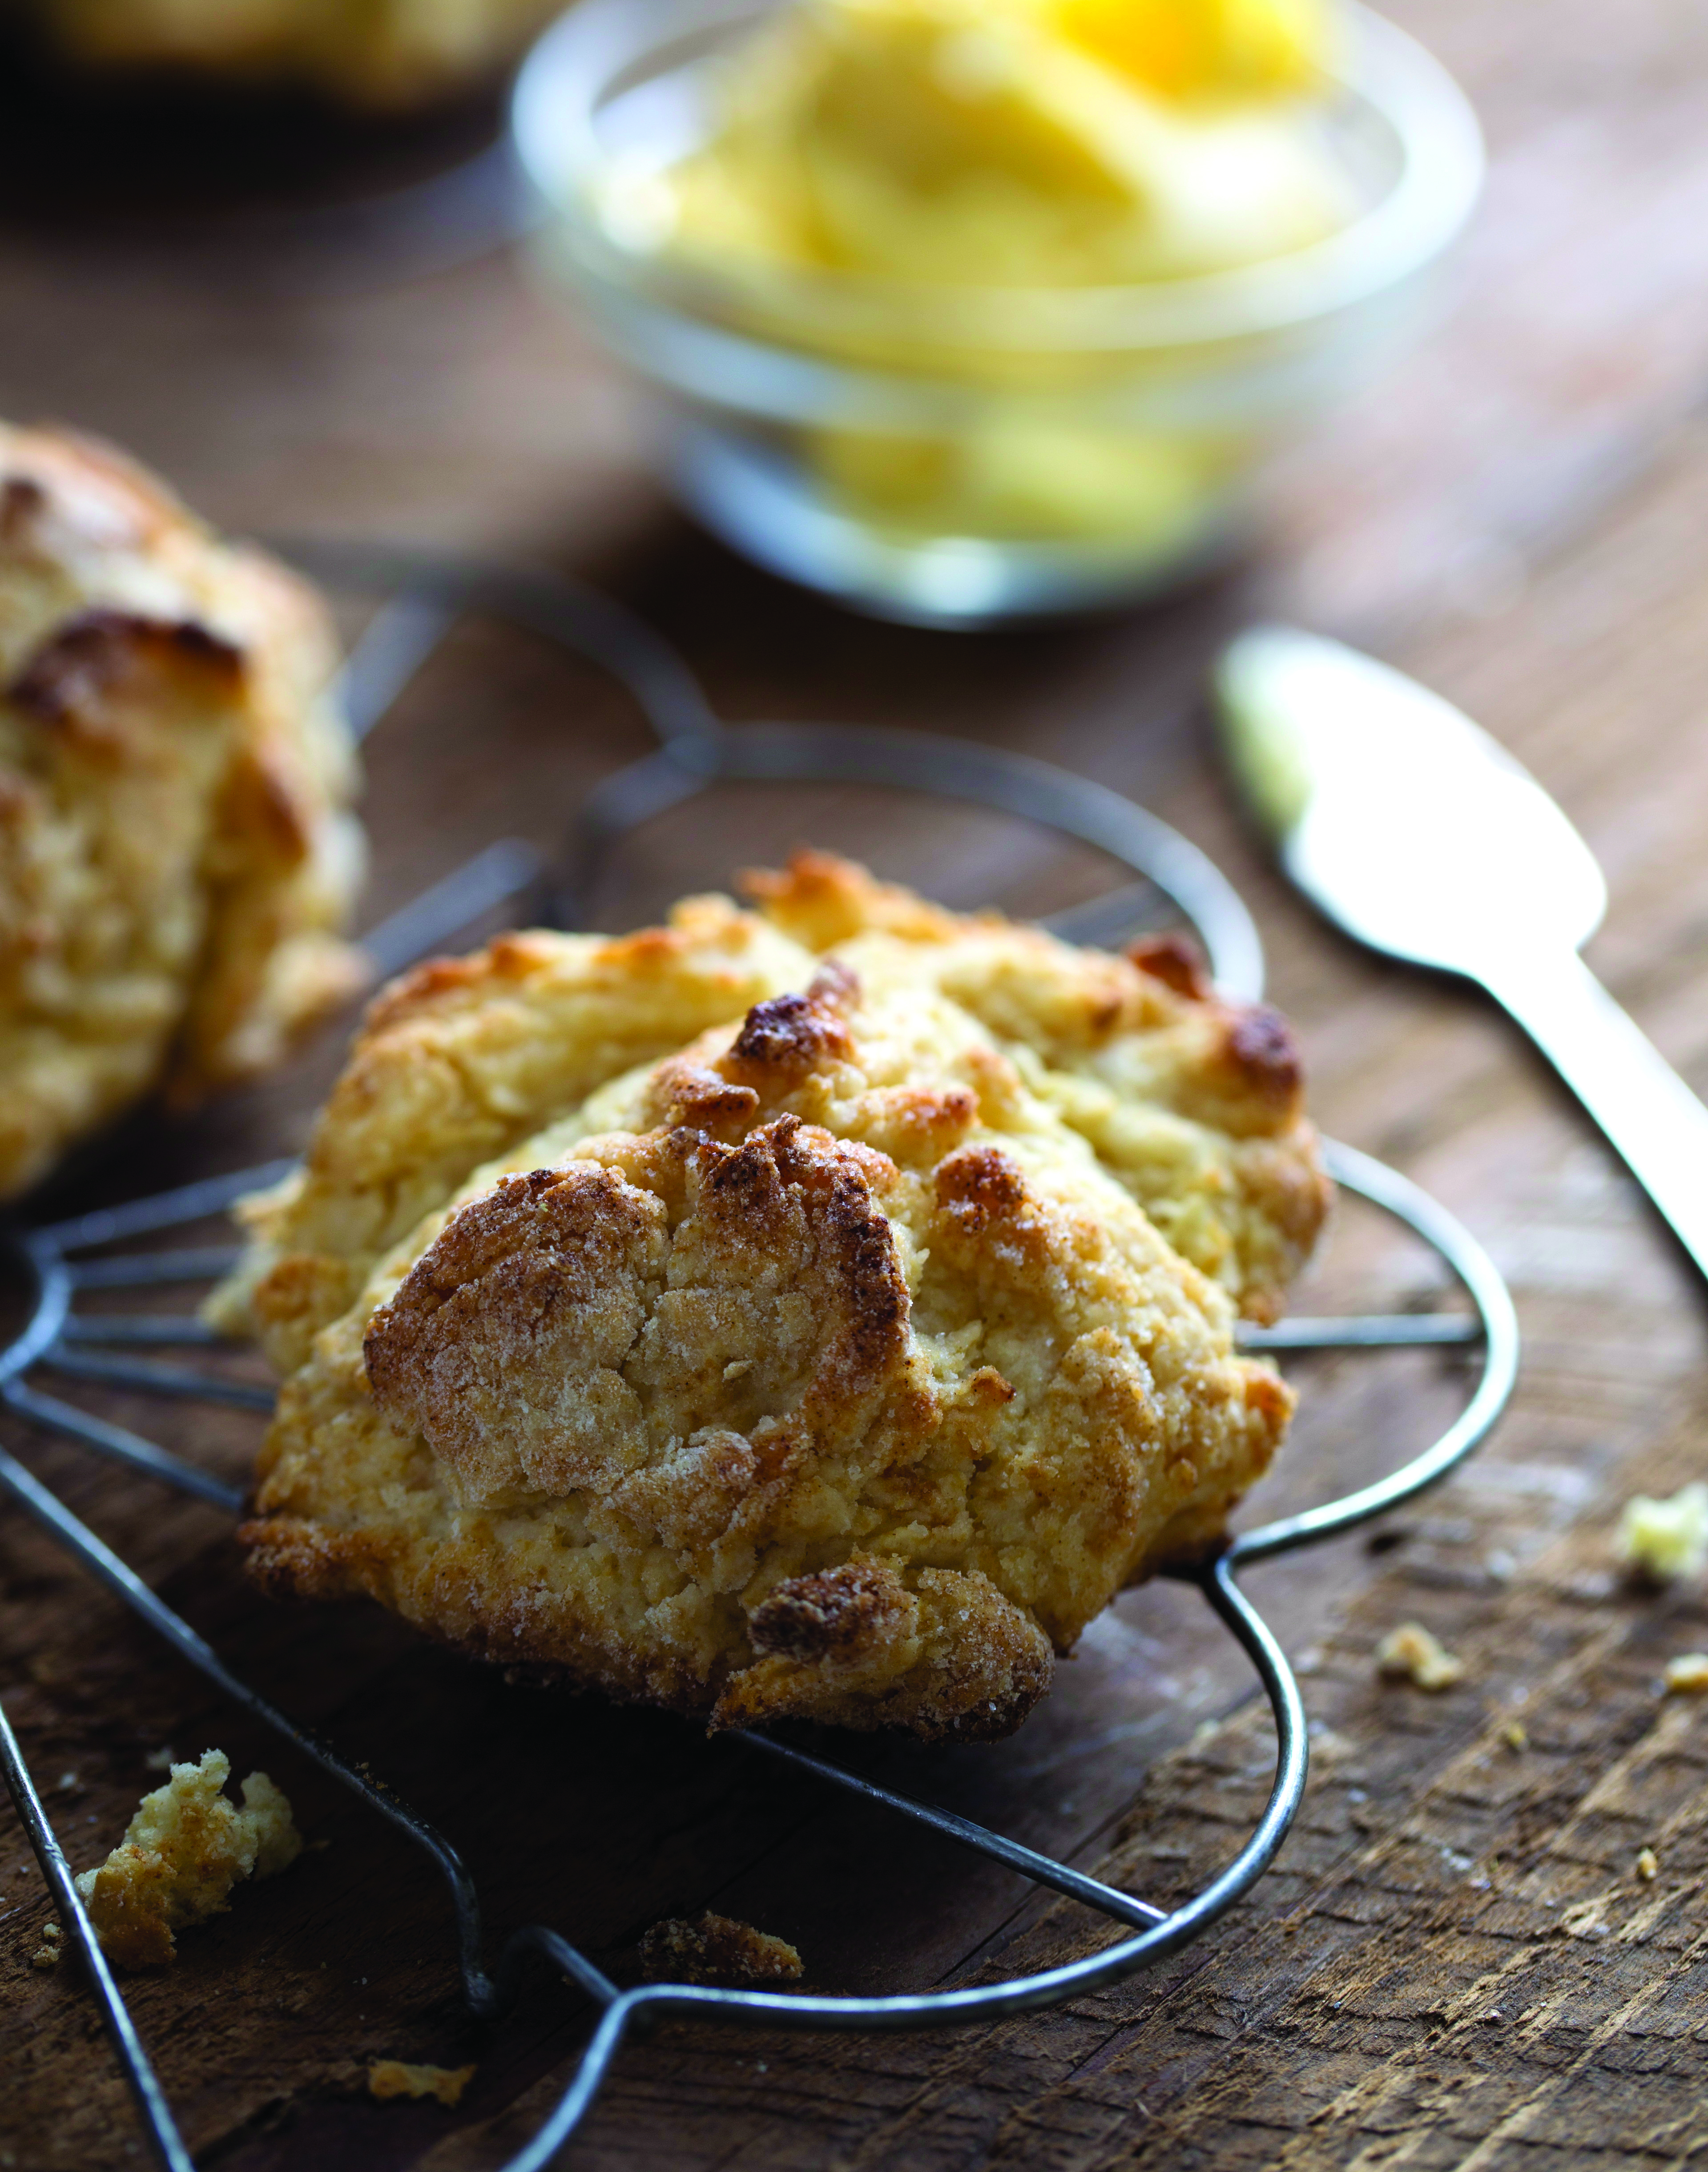 Pie Cottage Scones from Home Cooking with Kate McDermott